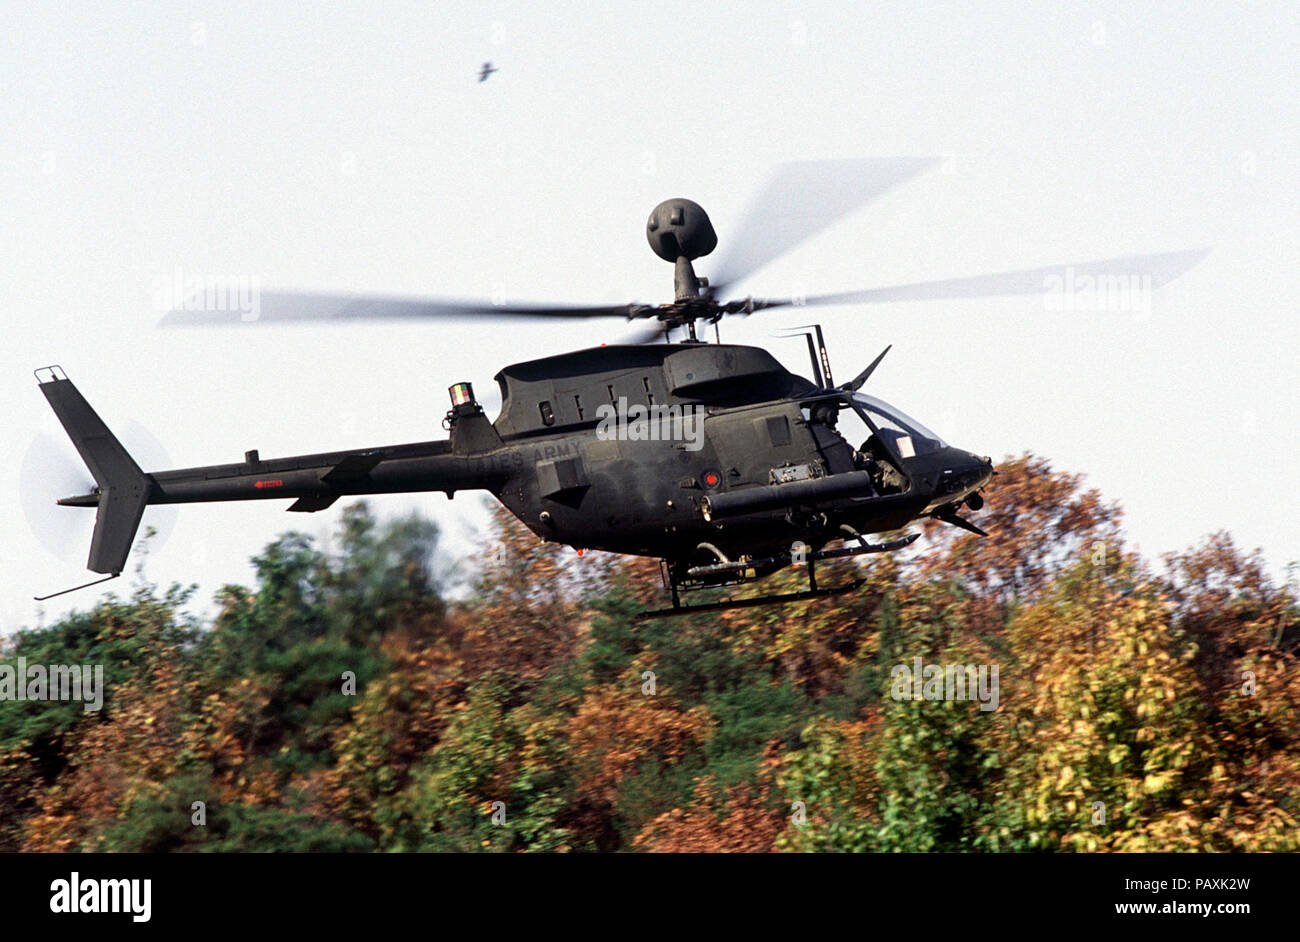 A US Army OH-58D helicopter with the 4th Squadron, 7th Cavalry Regiment hovers over the tree tops as it prepares to support armor belonging to C Troop of the 4-7 Cavalry during maneuvers and gunnery training at t(-2. A US Army  OH-58D helicopter with the 4th Squadron, 7th  Cavalry Regiment hovers over the tree tops as it prepares to support armor belonging to C Troop of the 4-7 Cavalry during maneuvers and gunnery training at the Korea Training Center, Republic of Korea on Oct. 25, 1998.  The center is manned throughout the year and various armored units rotate through training scenarios to me Stock Photo